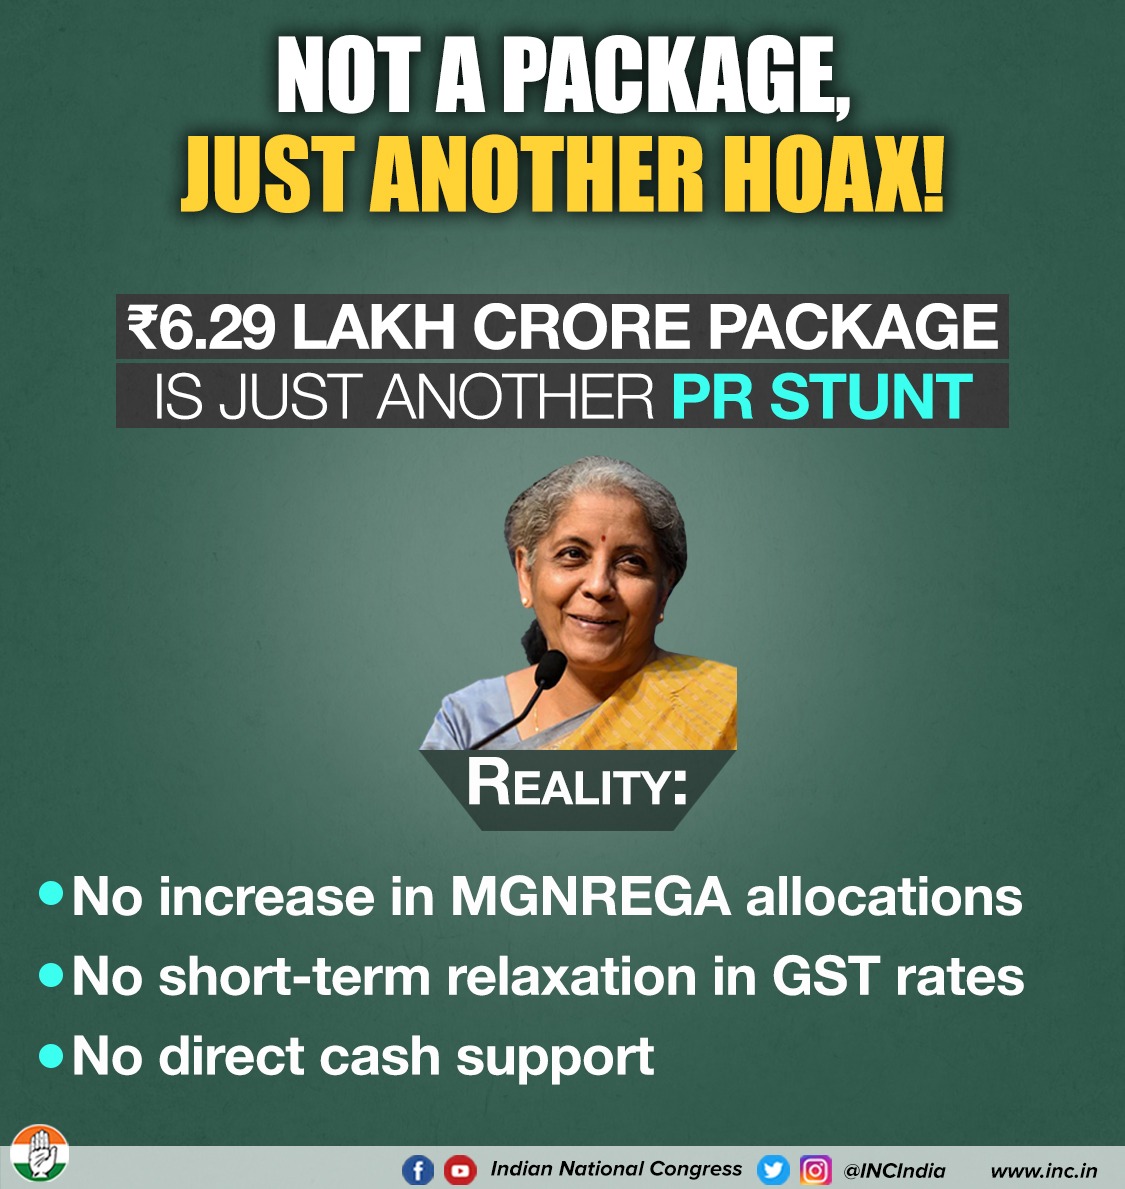 #BJPKaDhakoslaPackage
Transferring cash to the poor people would really be a better idea else this is package is another govt's jumbla.